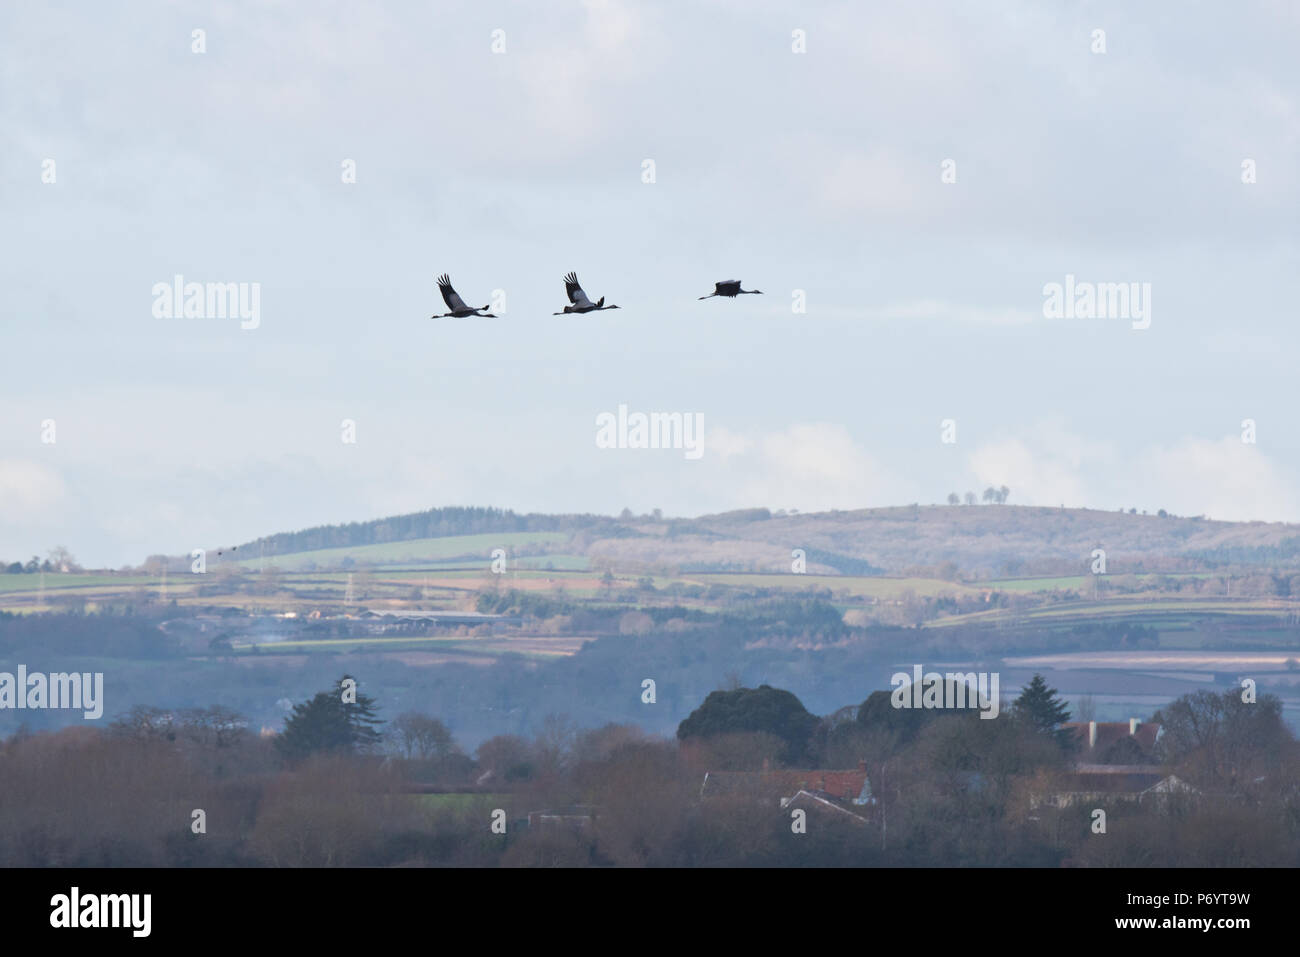 Three Cranesin flight over PSPB Nature Reserve at West Sedge Moor on the Somerset Levels during their Big Wetland Duck Watch Stock Photo